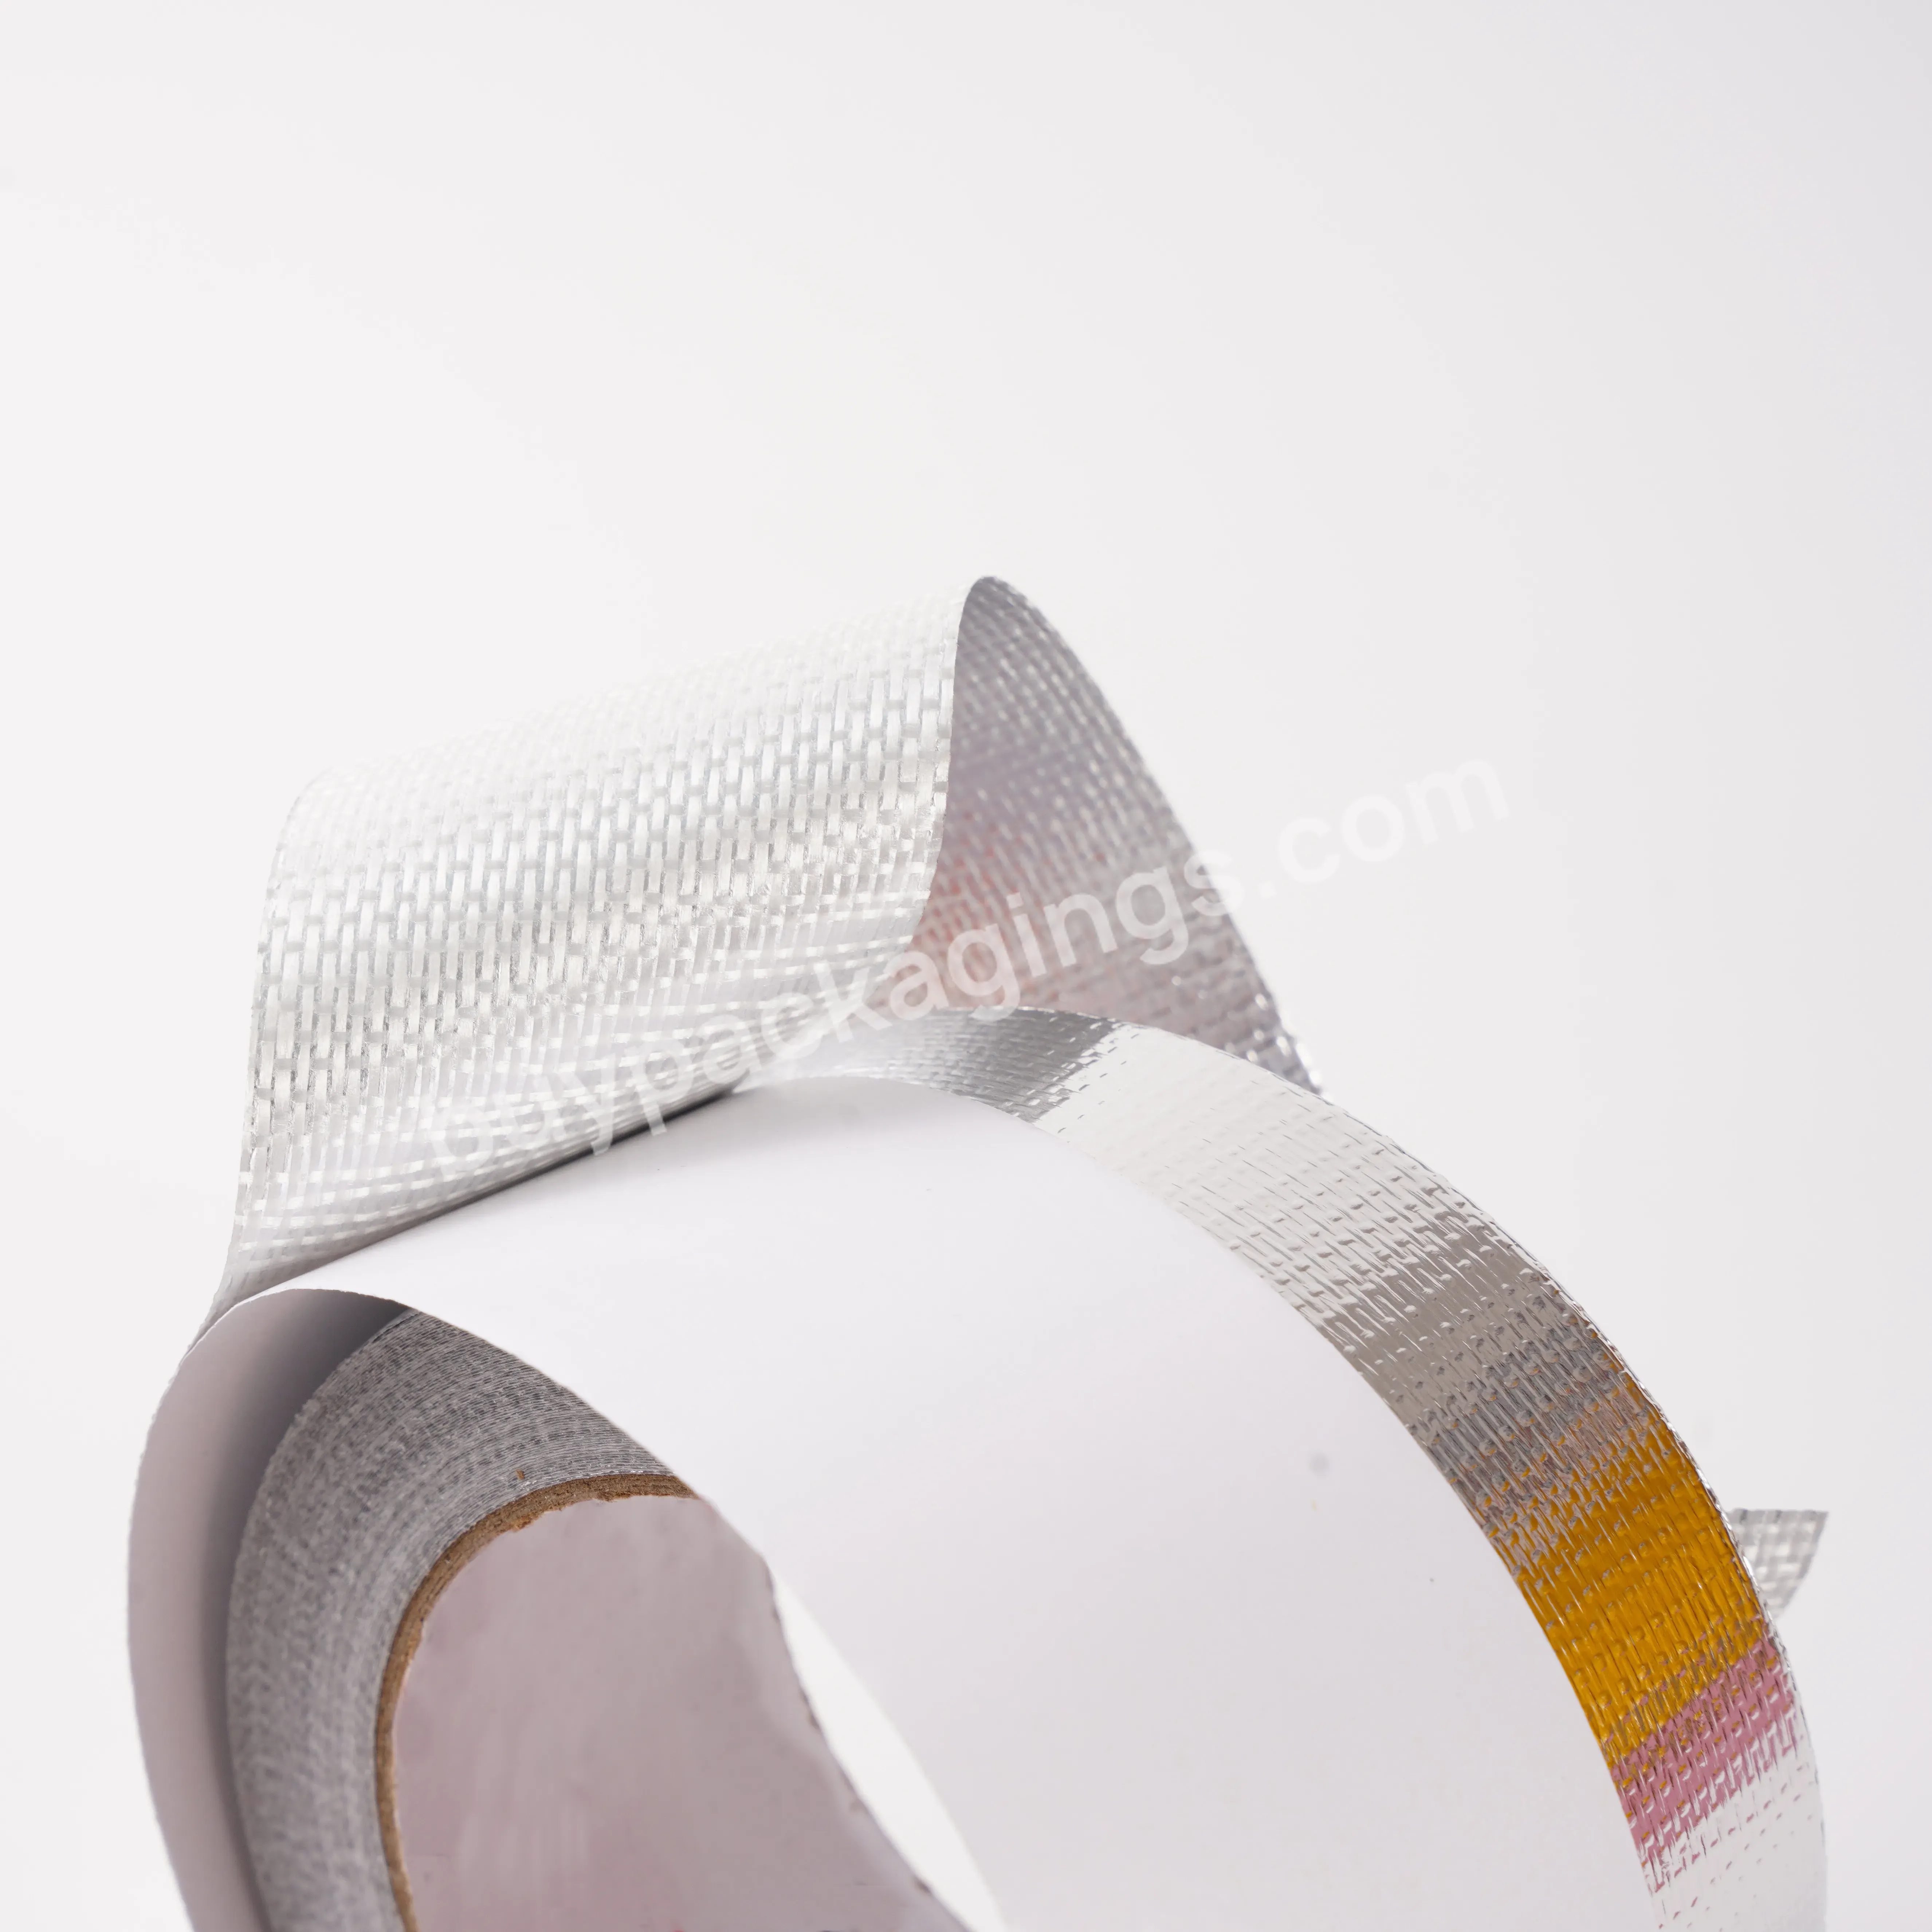 Aluminum Foil Tape High Temperature Thickness 0.06mm For Thermal Insulation Material Insulation - Buy Aluminum Duct Tape,Heat Resistant Aluminum Foil Tape,Aluminum Foil Duct Tape.